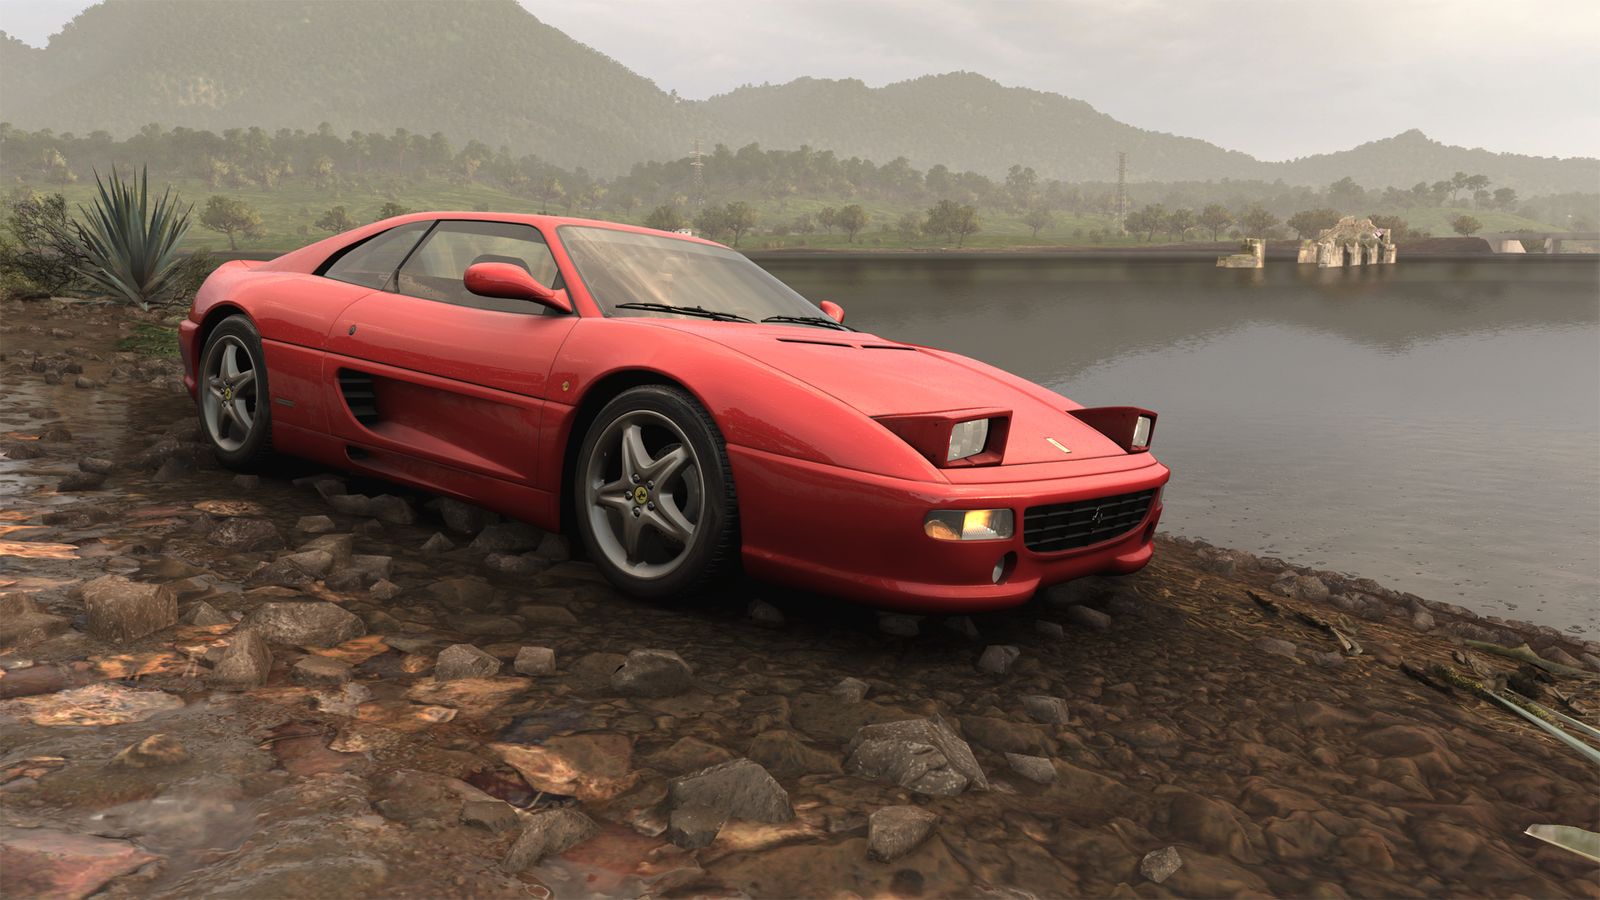 Forza Horizon 5 #FastFromThePast Photo Challenge Temple of Quechula